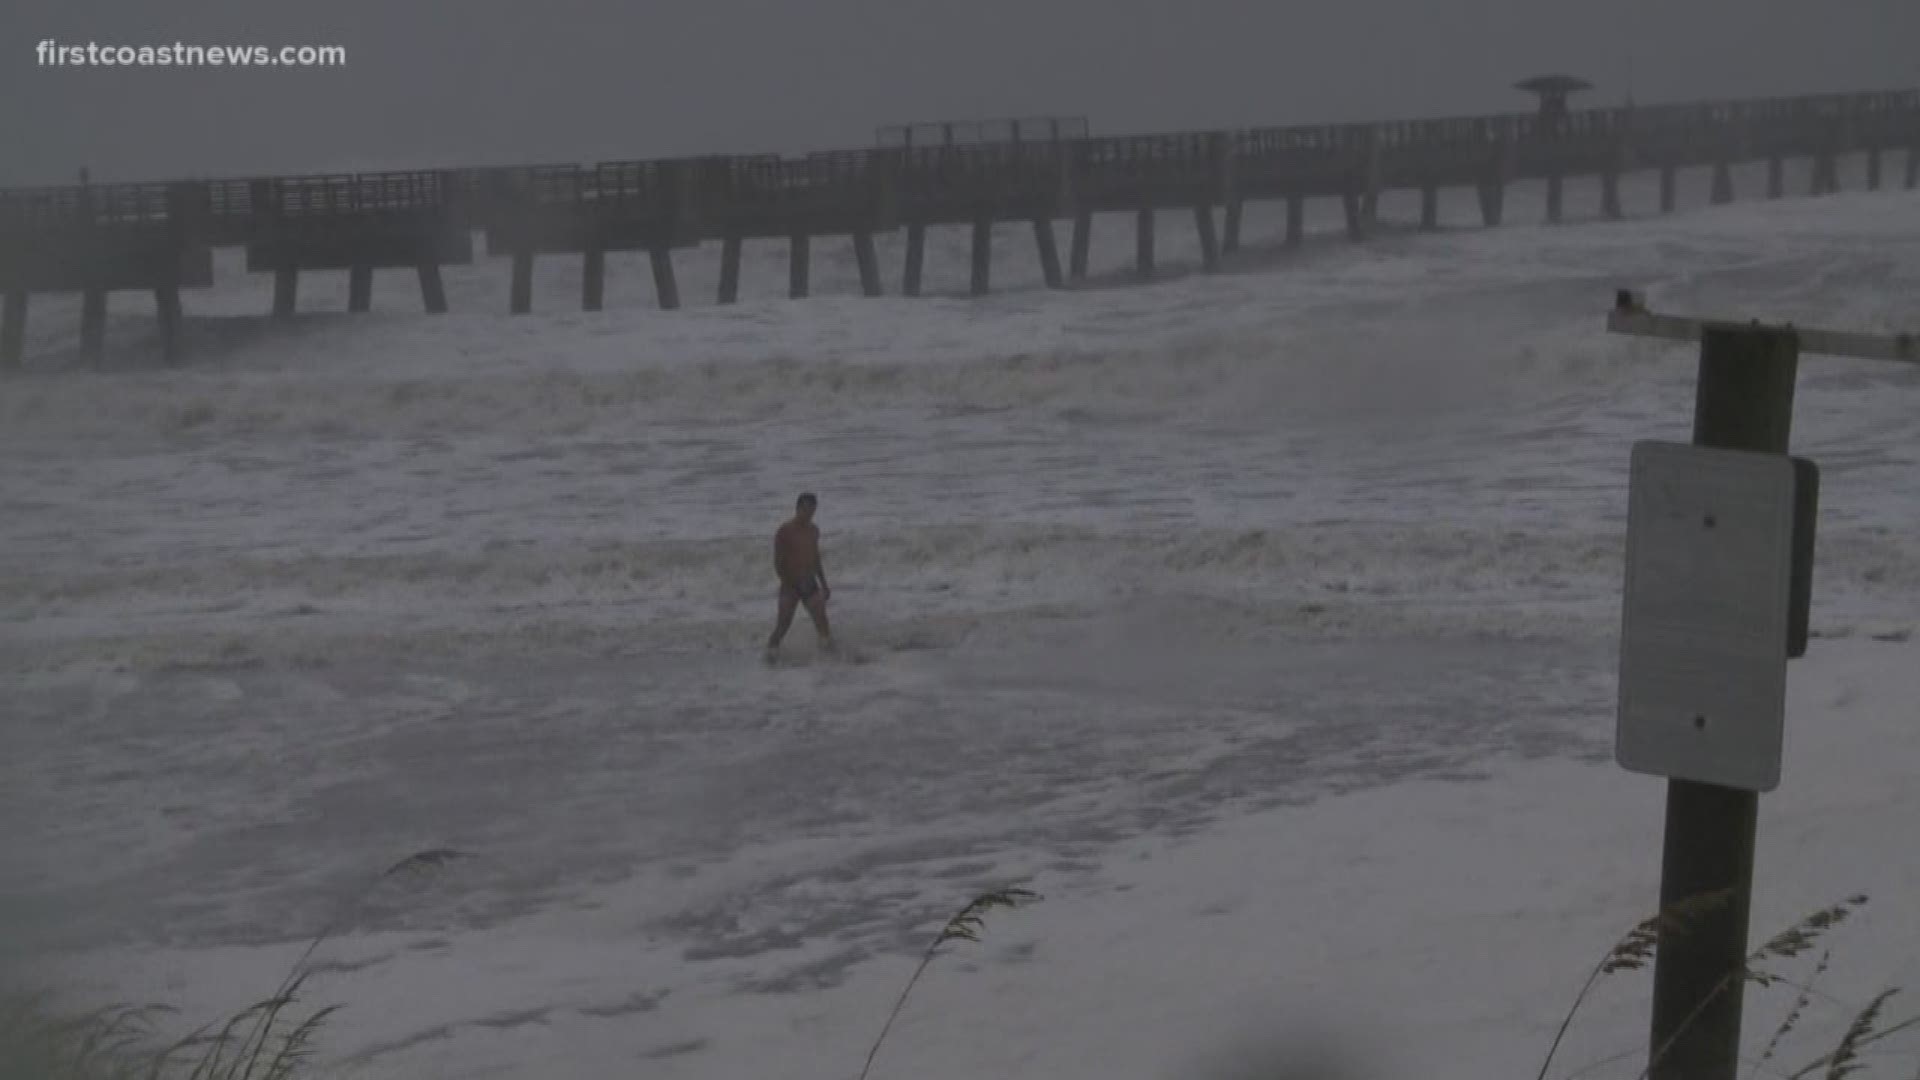 Mayor Curry has urged people to stay away from beaches, but some people just aren't listening.